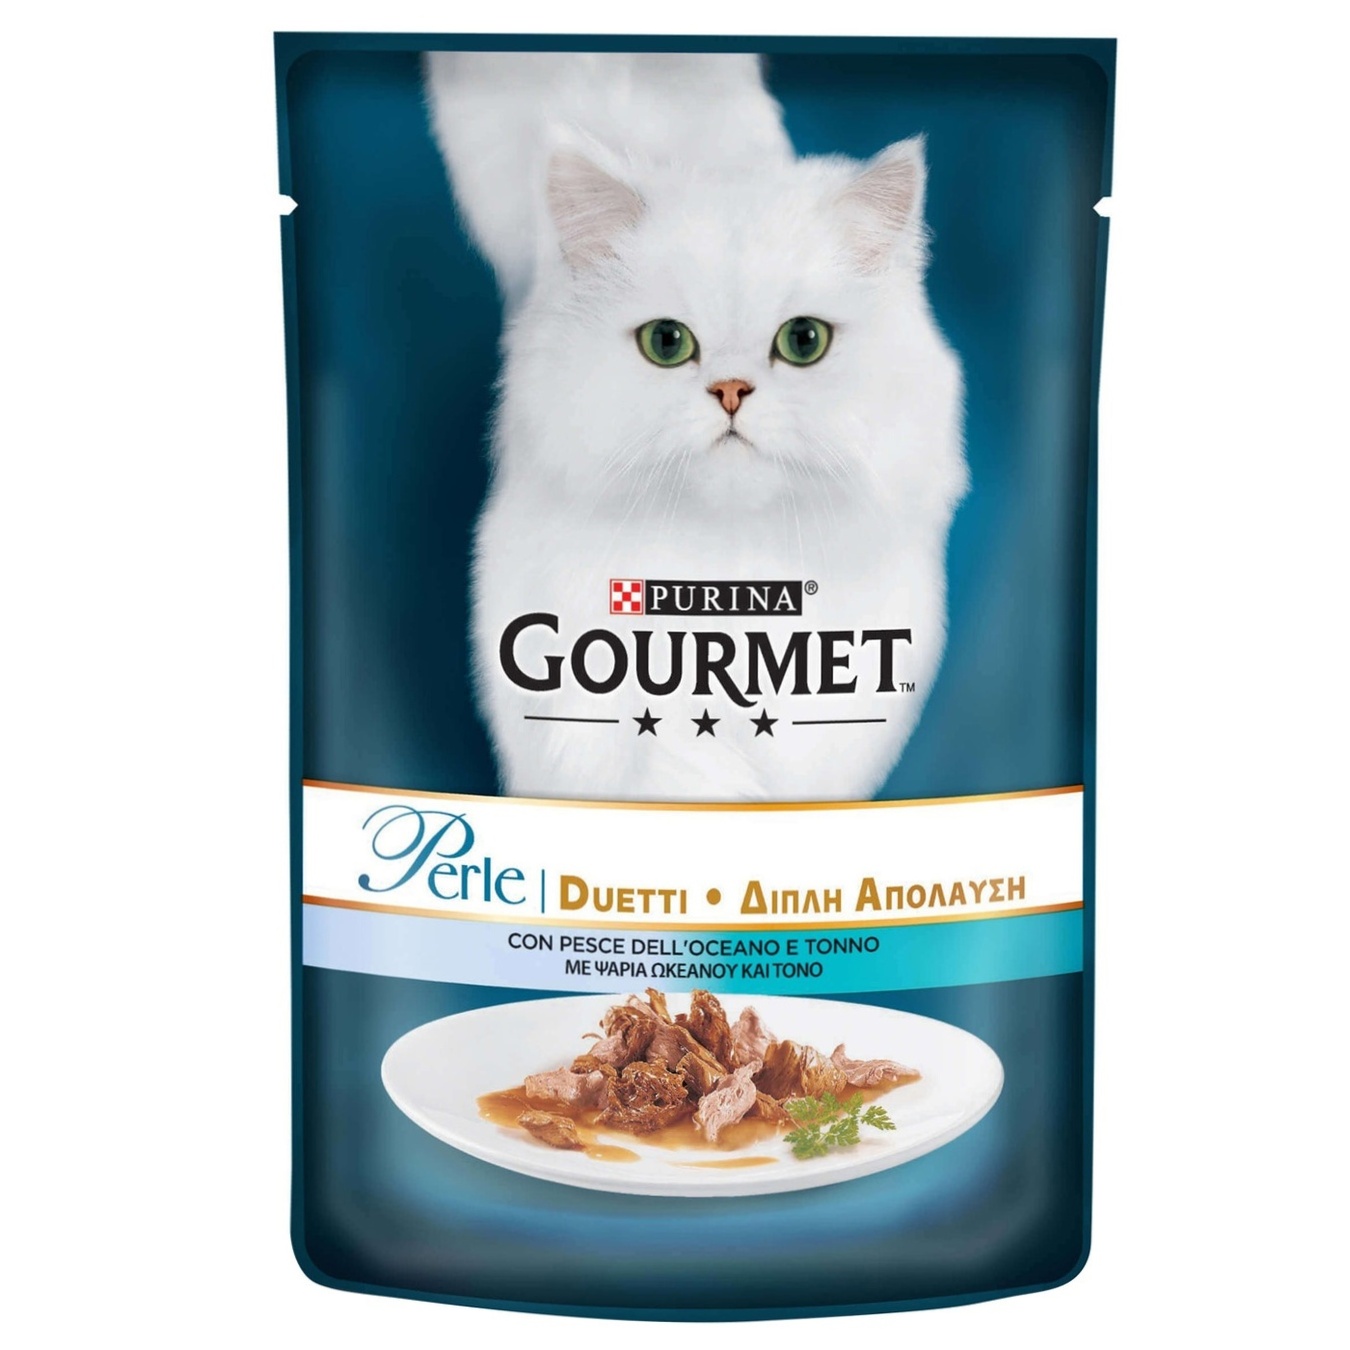 Purina Gourmet Perle Duo for cats in sauce with ocean fish and tuna food 85g